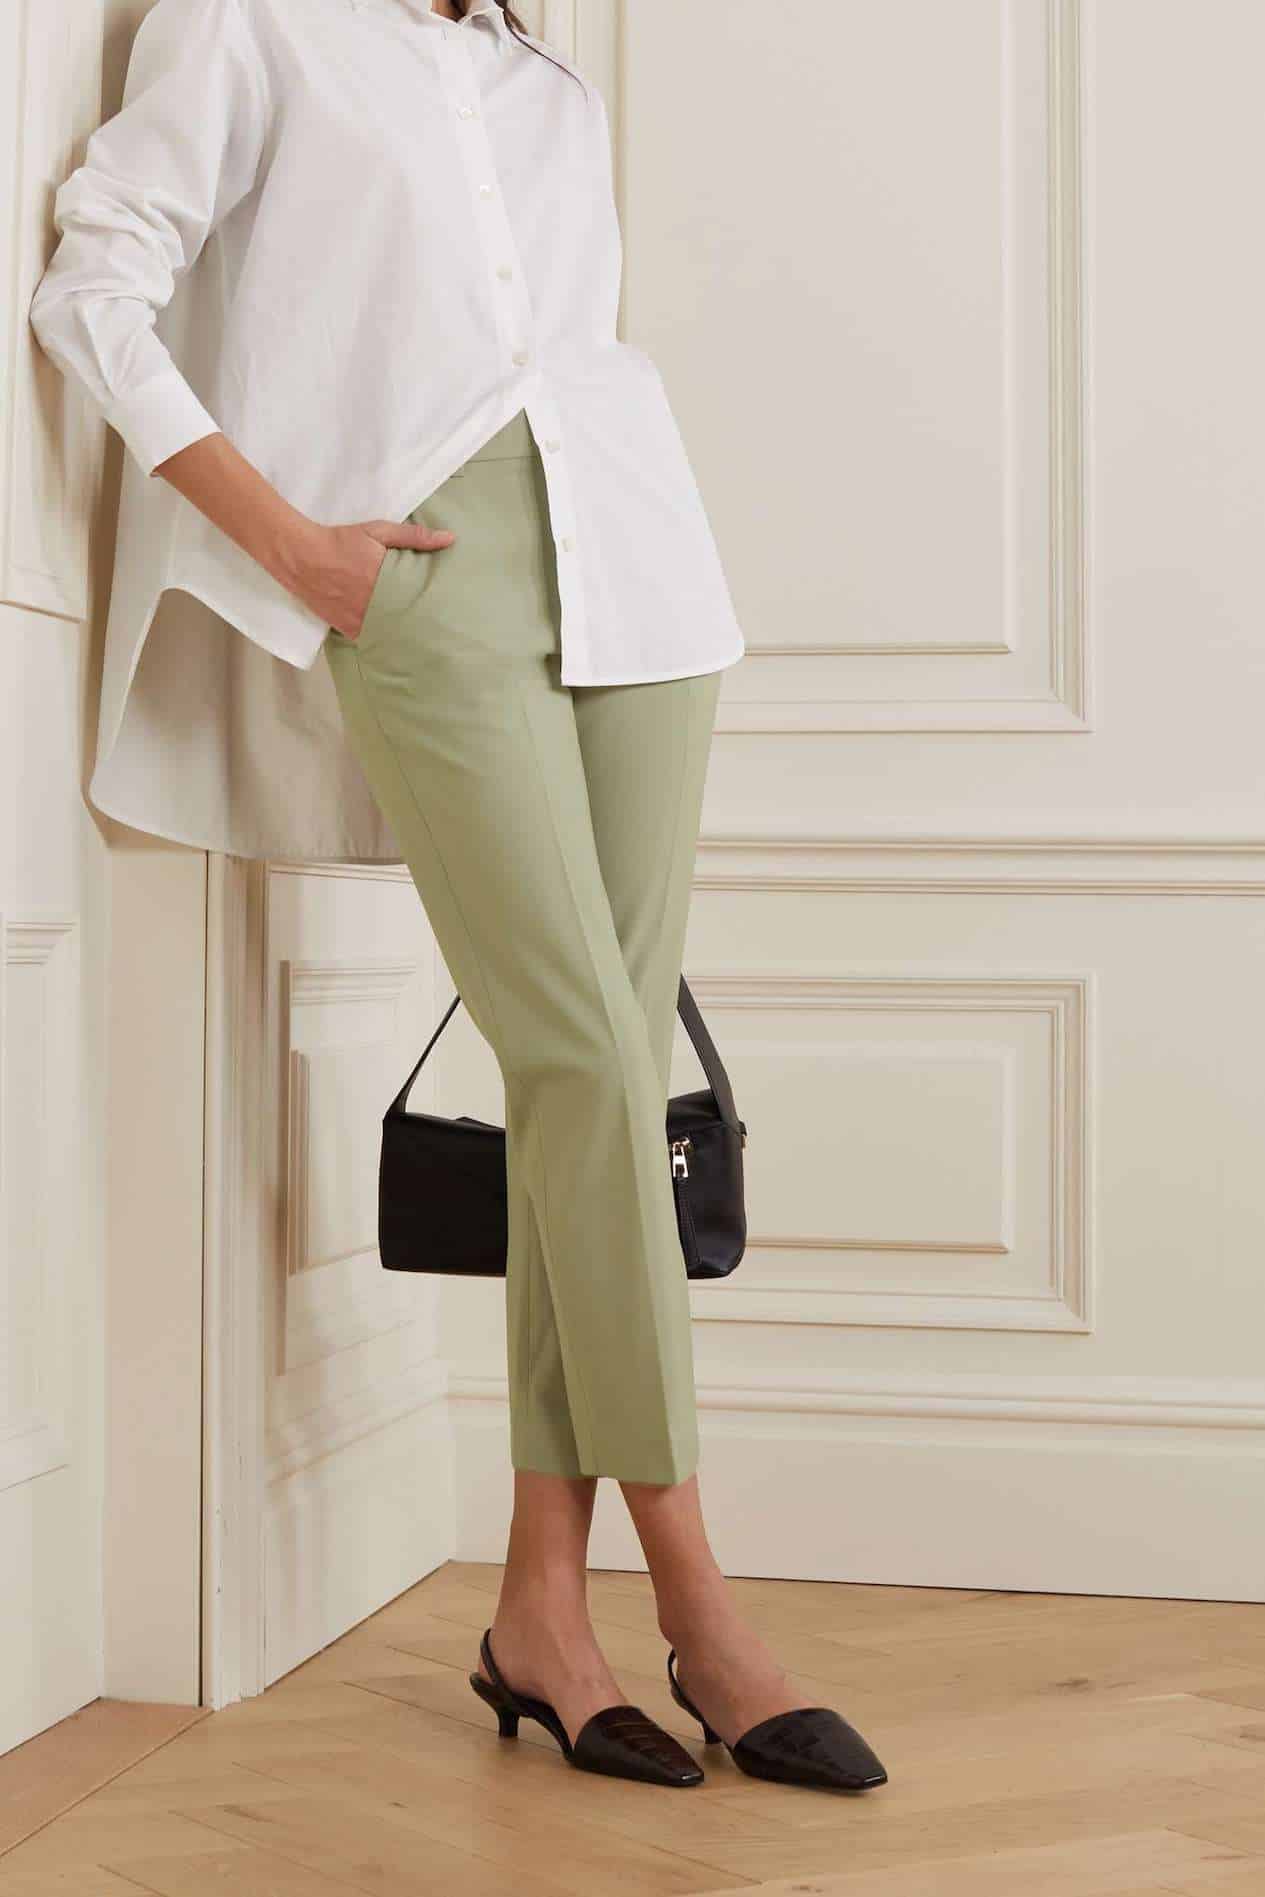 image of a woman from the neck down wearing a white button up shirt, light green pants, black pointy mules, and a black purse